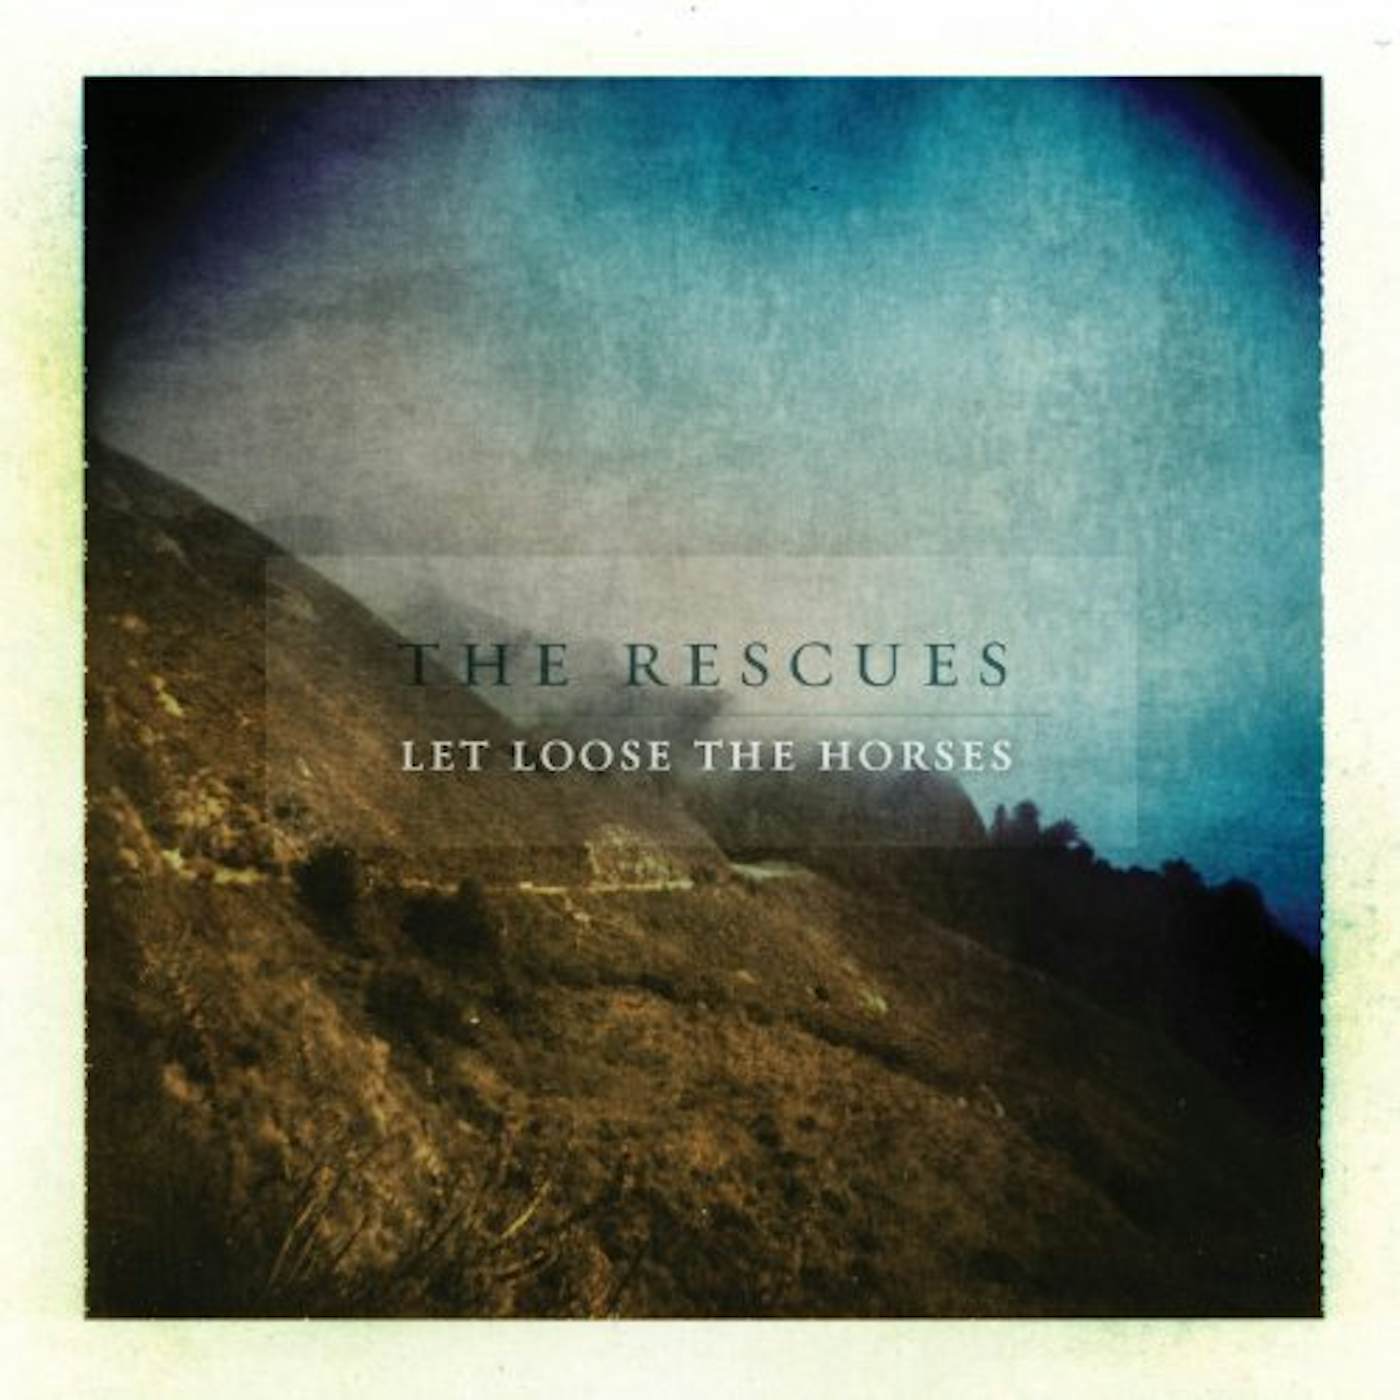 The Rescues Let Loose The Horses Vinyl Record